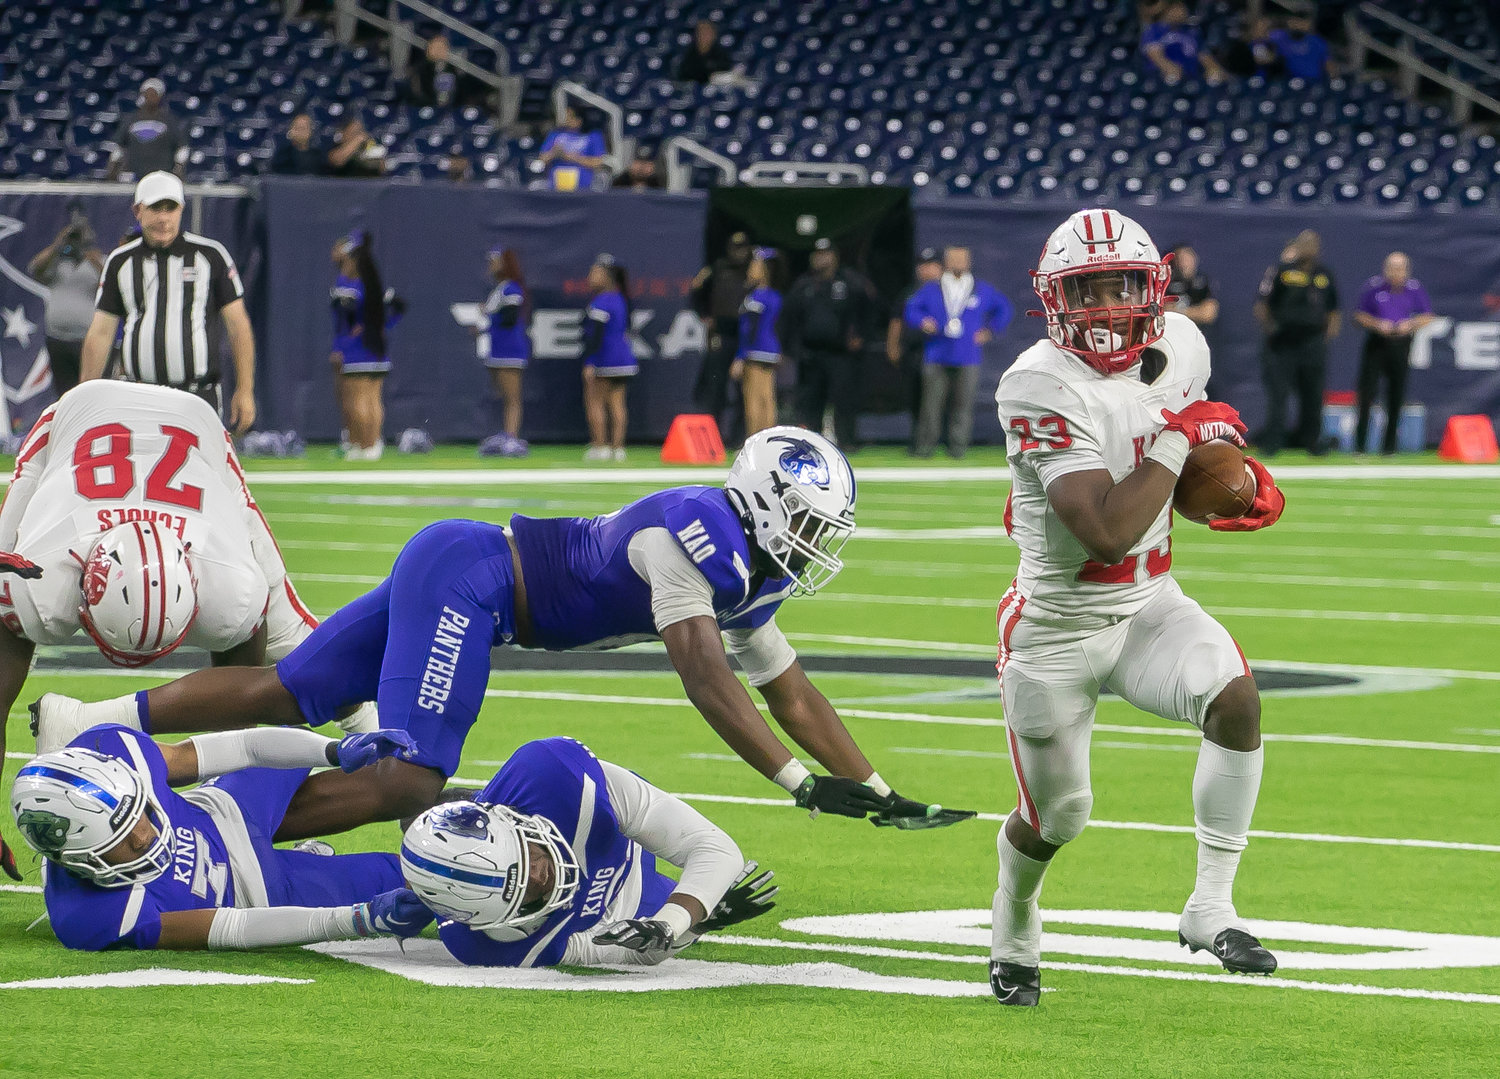 Seth Davis runs past a defender during Friday's Class 6A-Division II Region III Final between Katy and C.E. King at NRG Stadium.